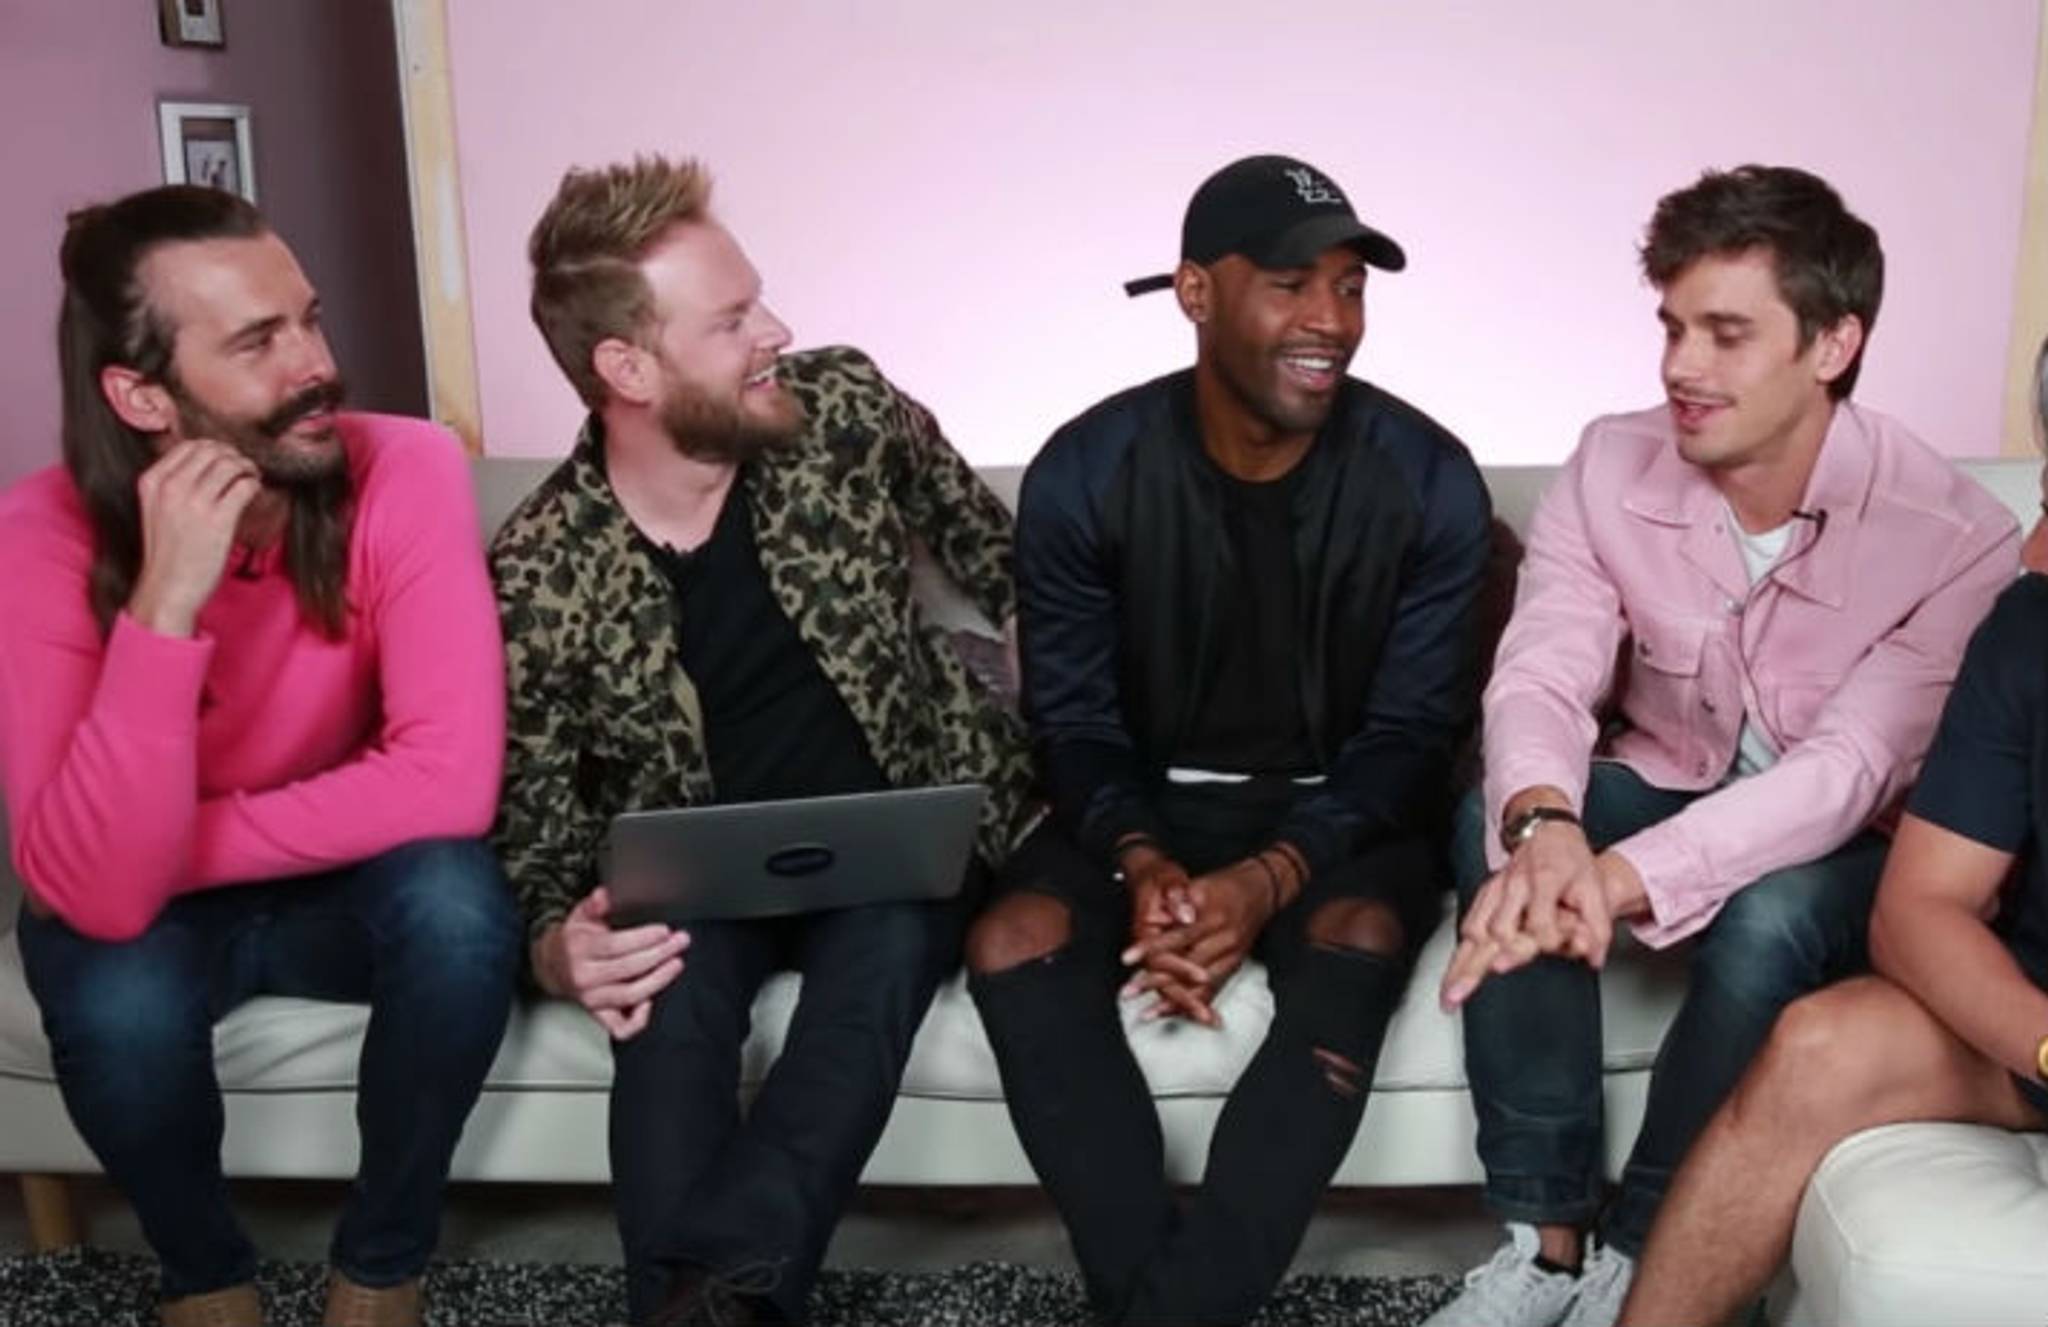 Netflix’s Queer Eye is political reality TV for Gen Y